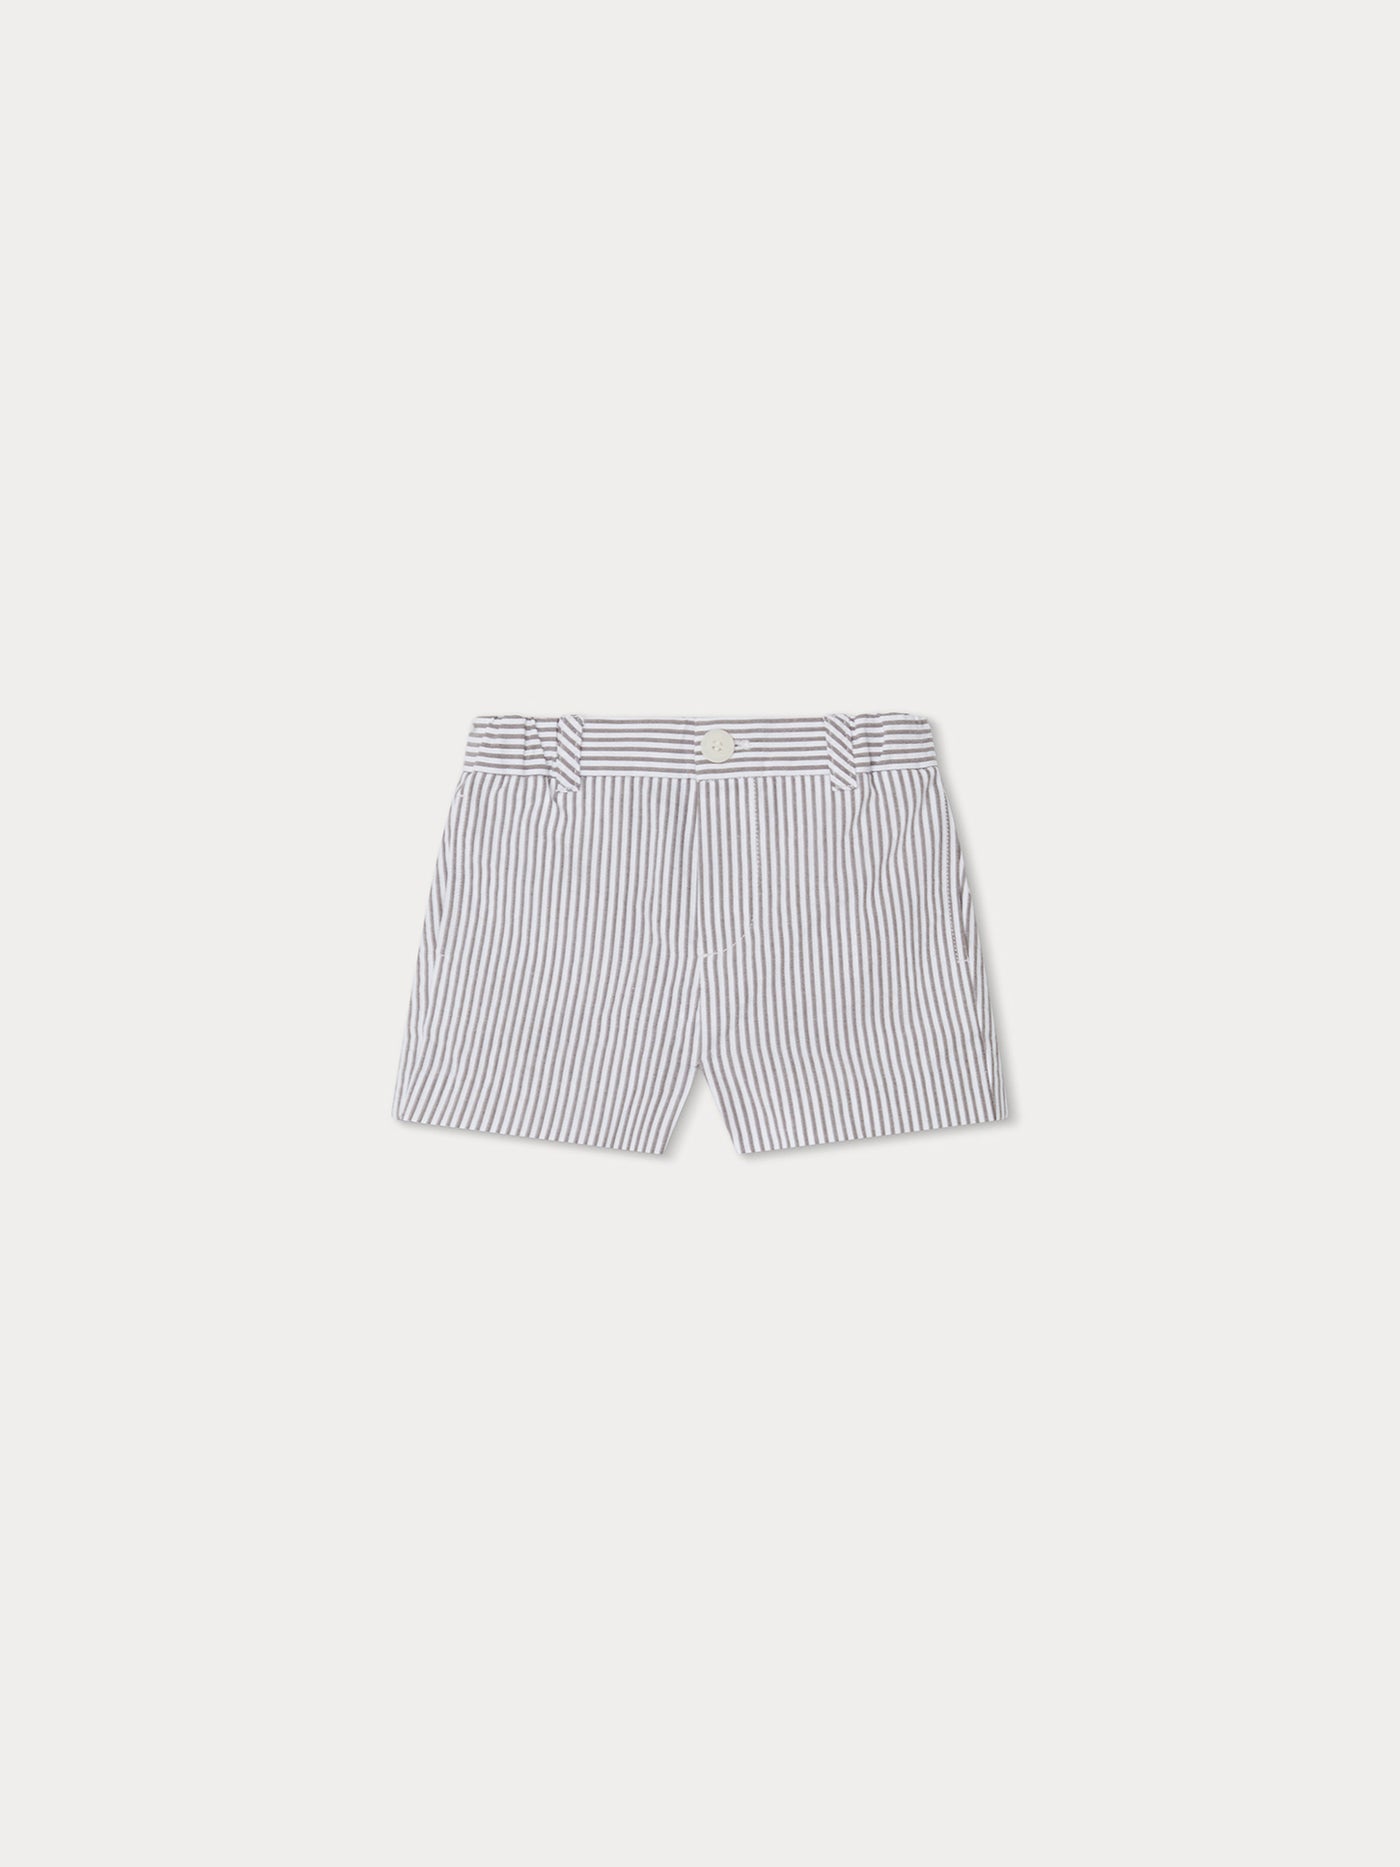 Cademy Shorts taupe stripes